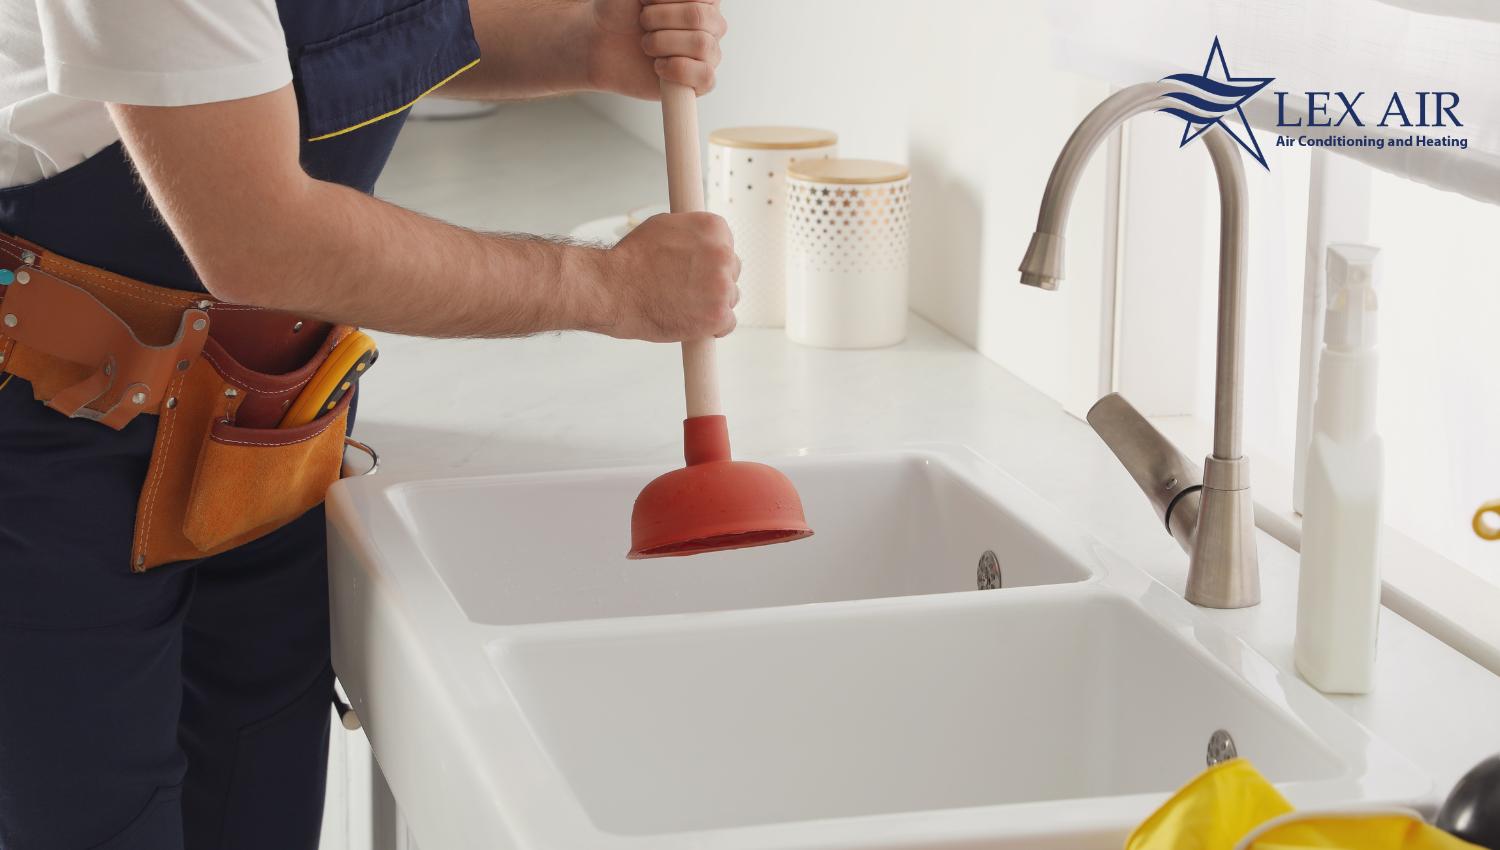 Carrollton Drain Cleaning Services